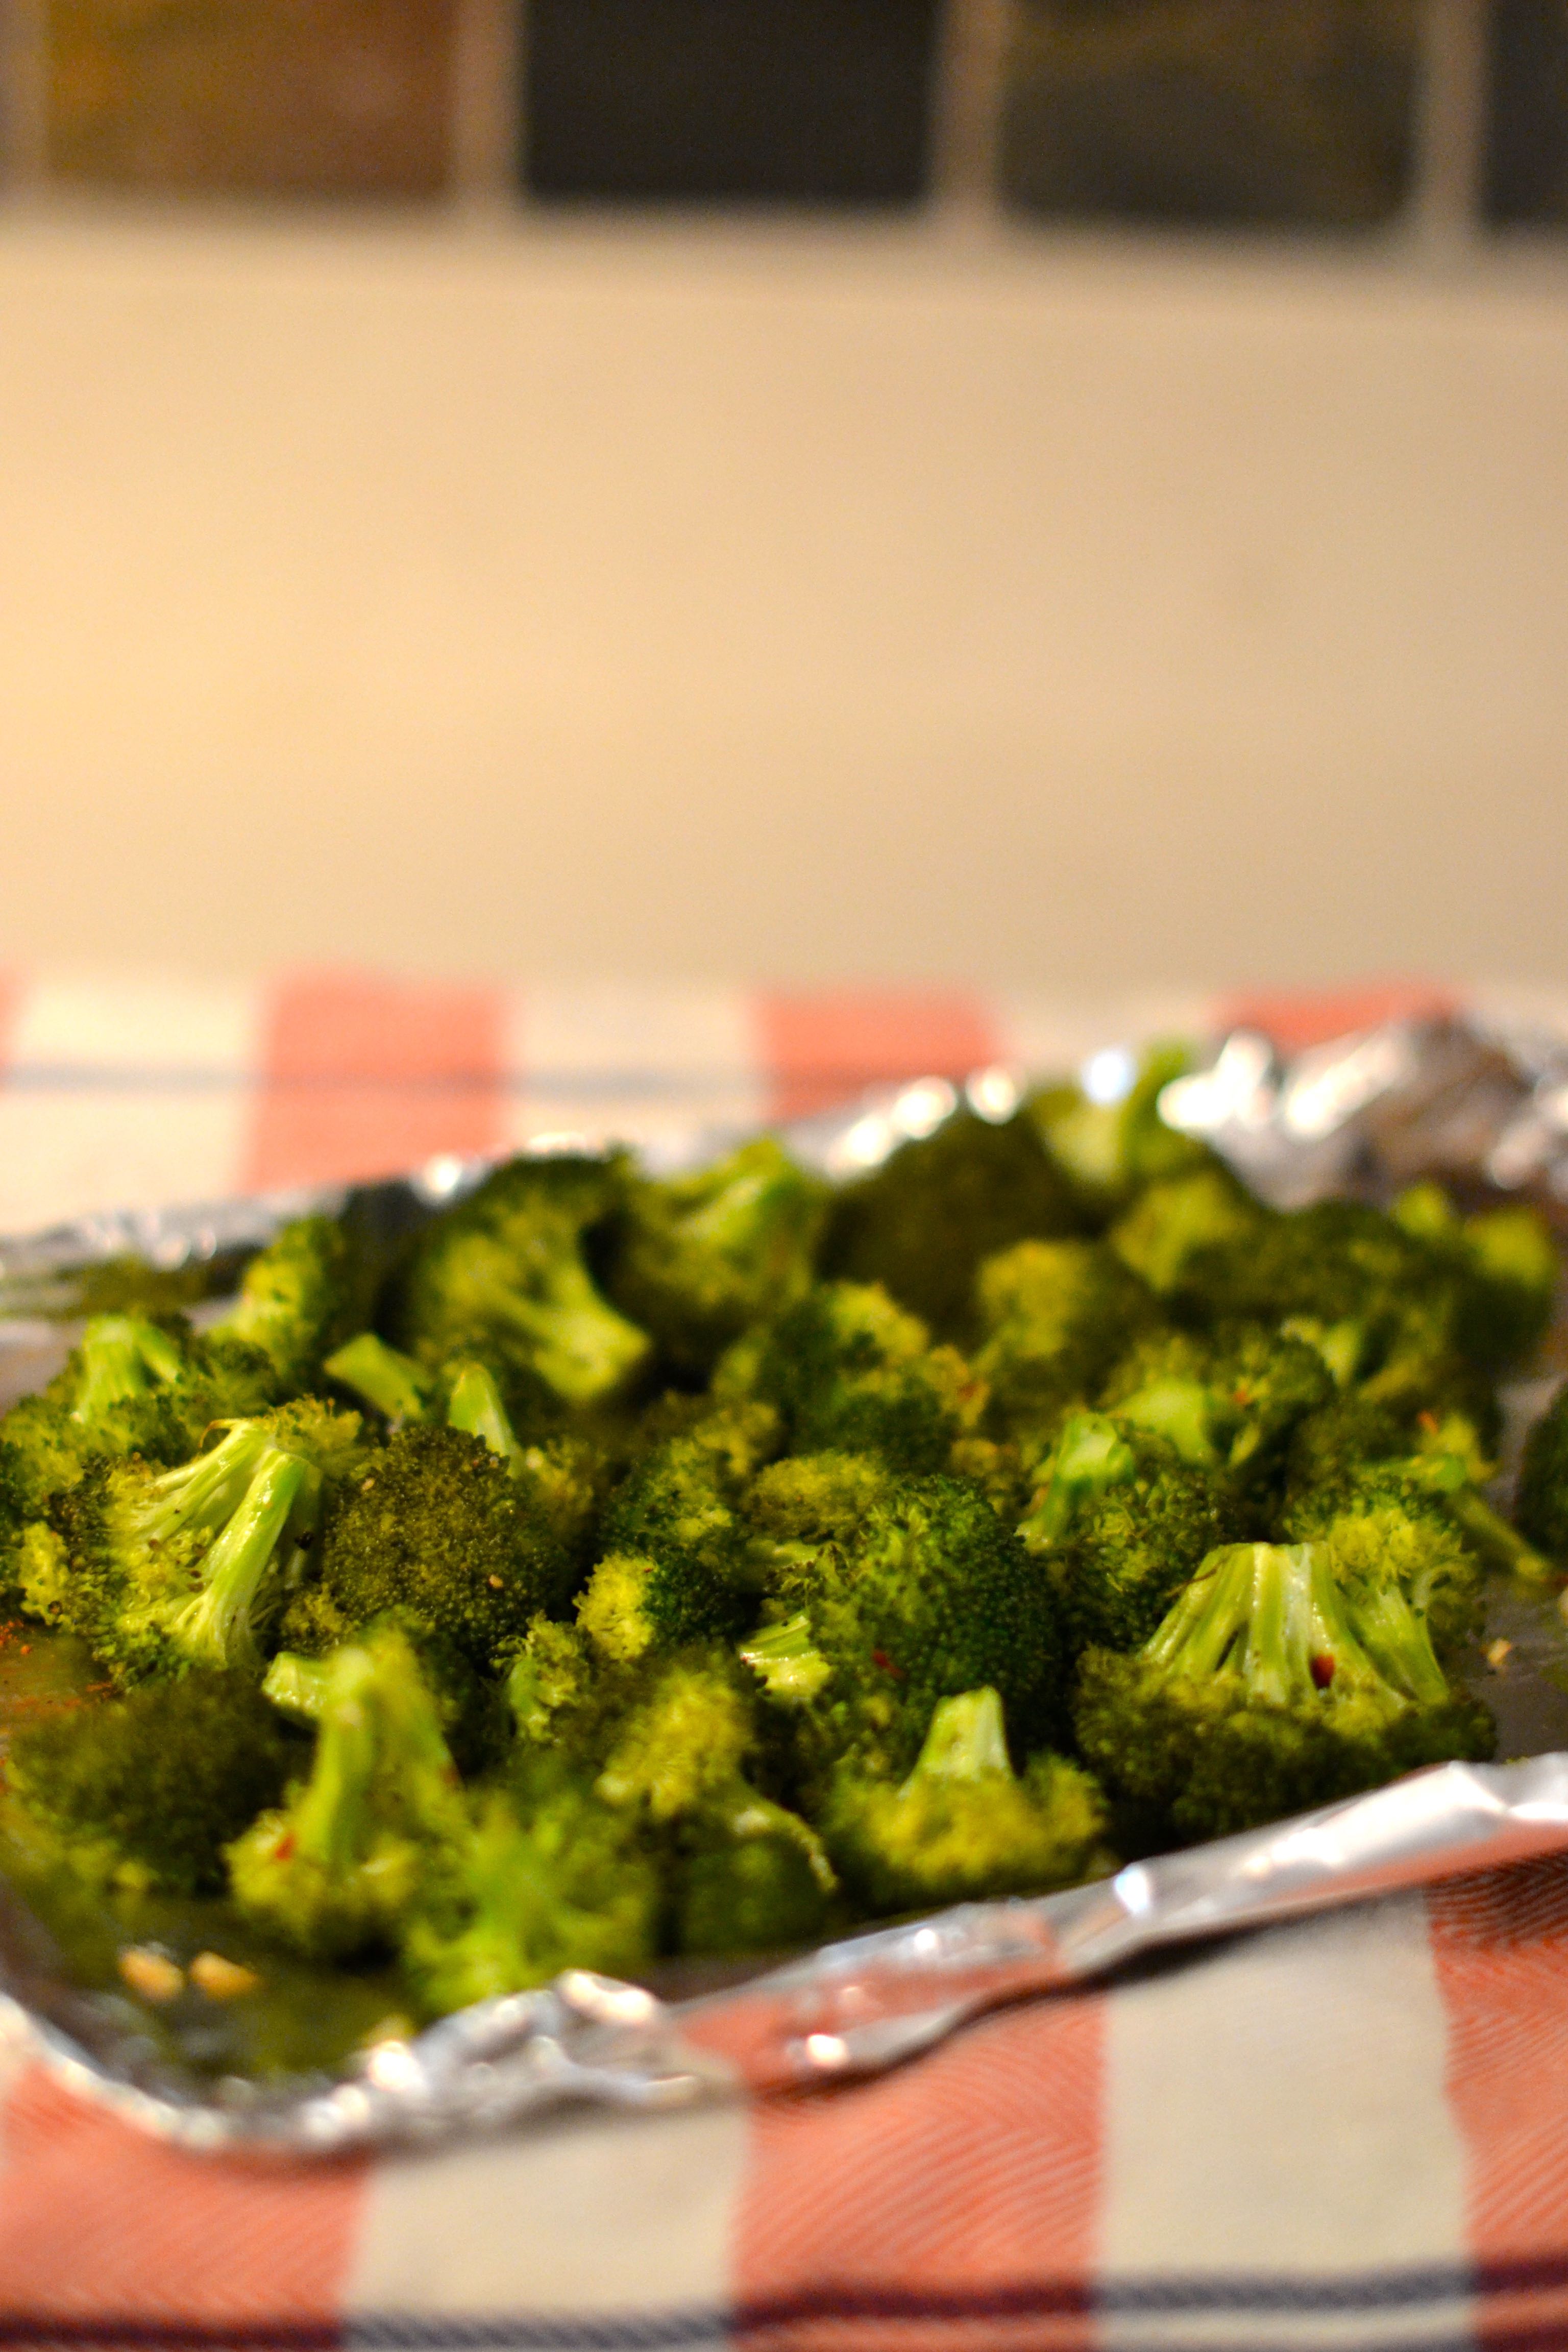 easy roasted broccoli recipe - only takes 25 minutes from start to finish!